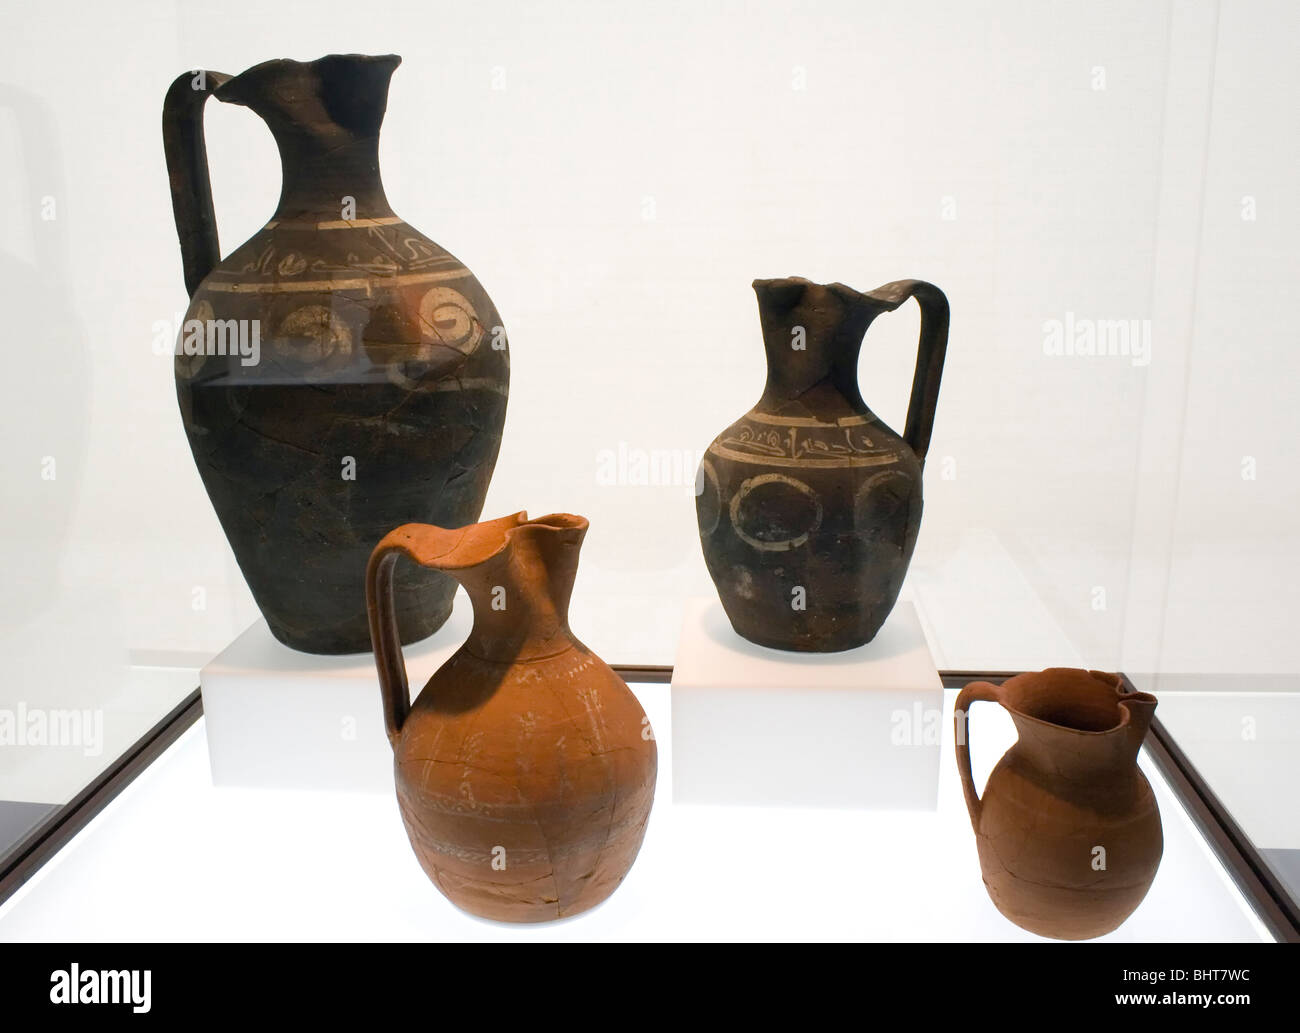 Bisque clay jugs with white painted decoration from the second half of the tenth century. Stock Photo